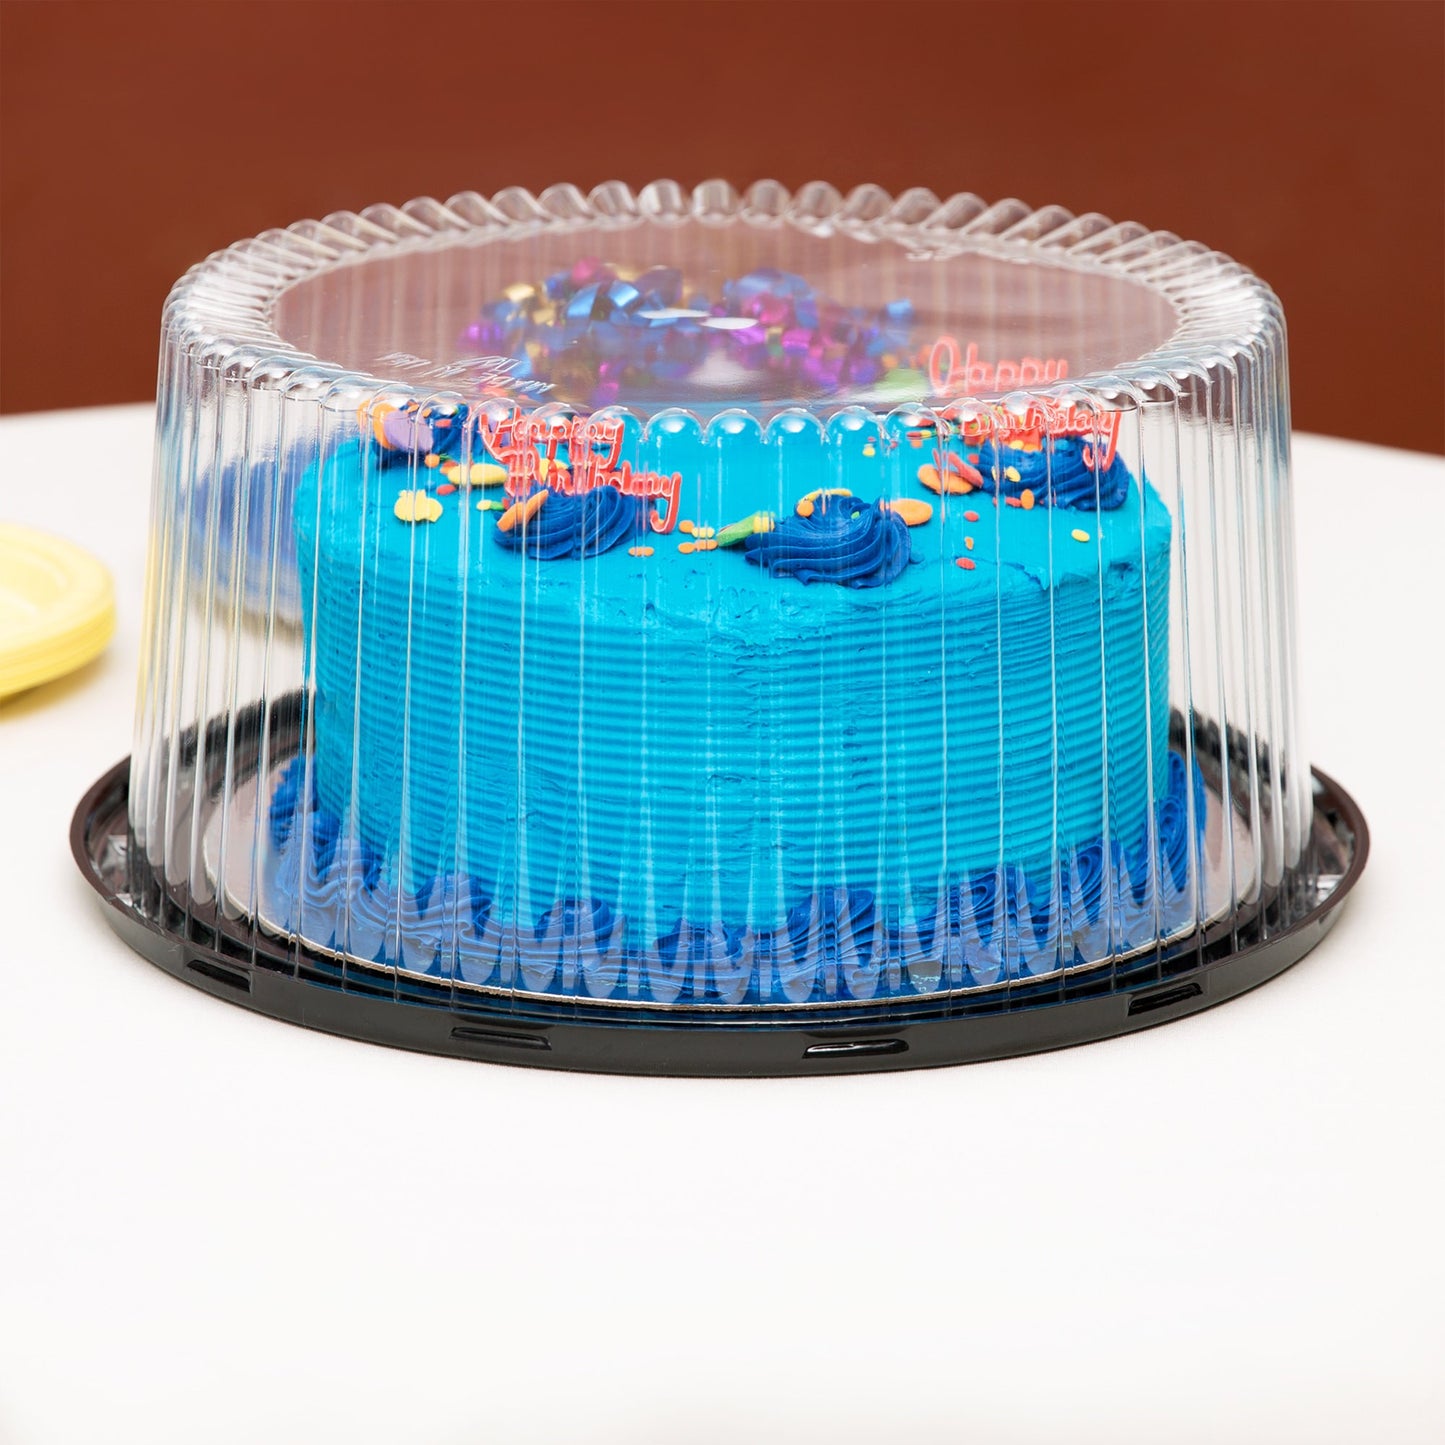 10" 2-3 Layer Cake Display Container w/ Clear Dome Lid